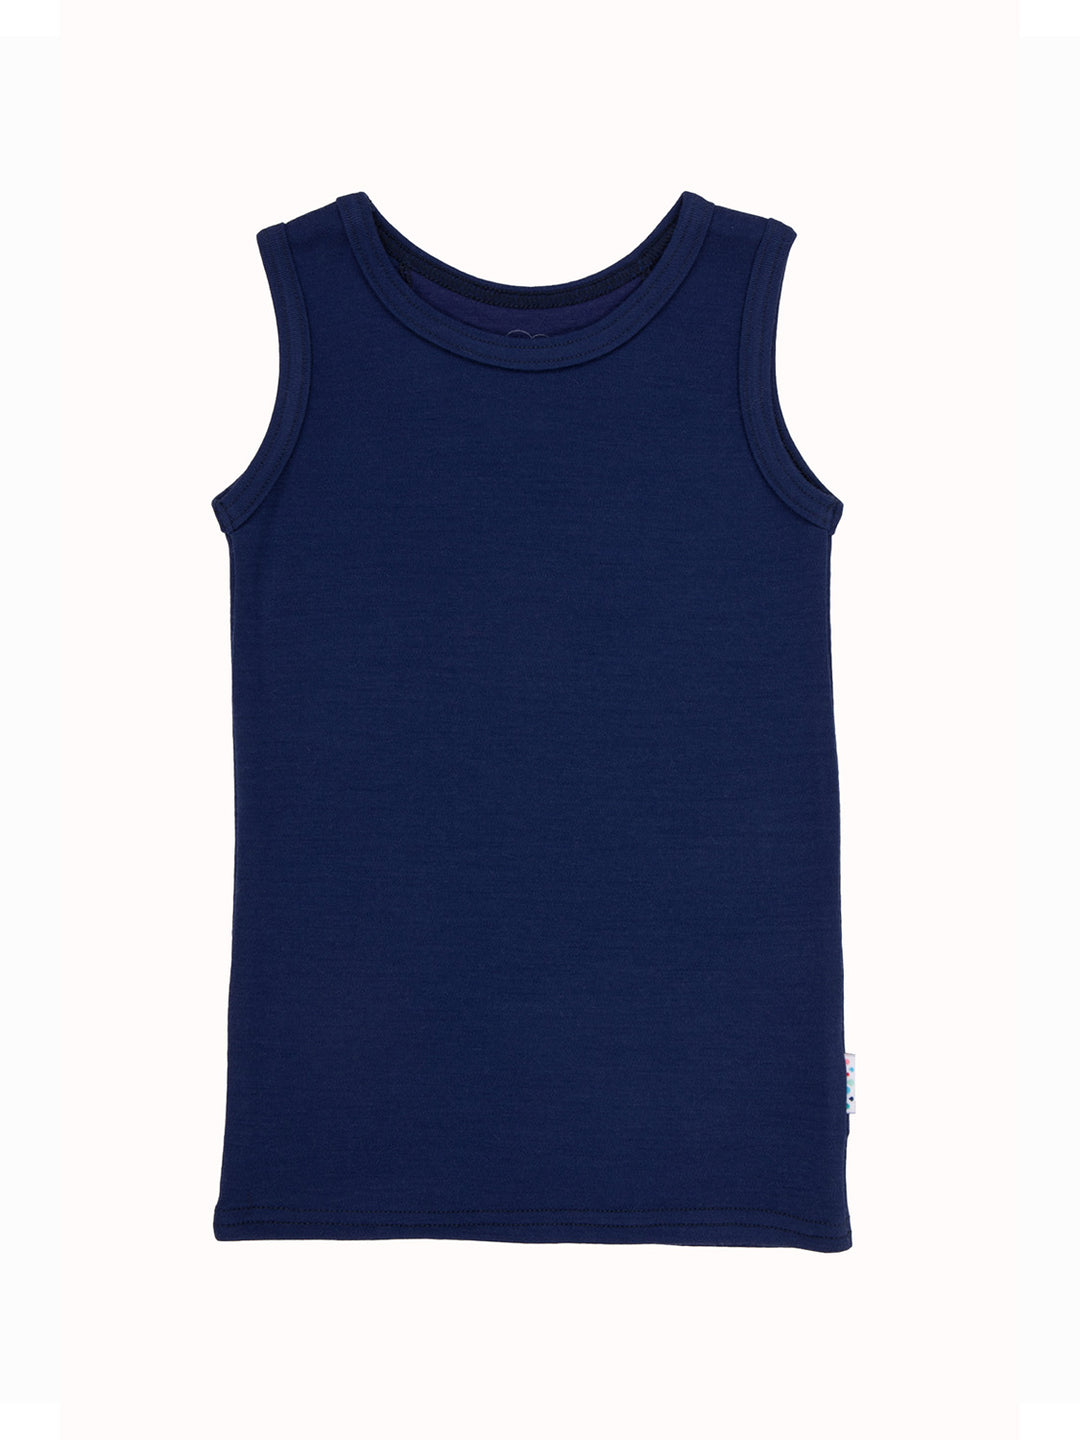 Imperfect Merino Kids Vest Imperfect Superlove Outlet French Navy